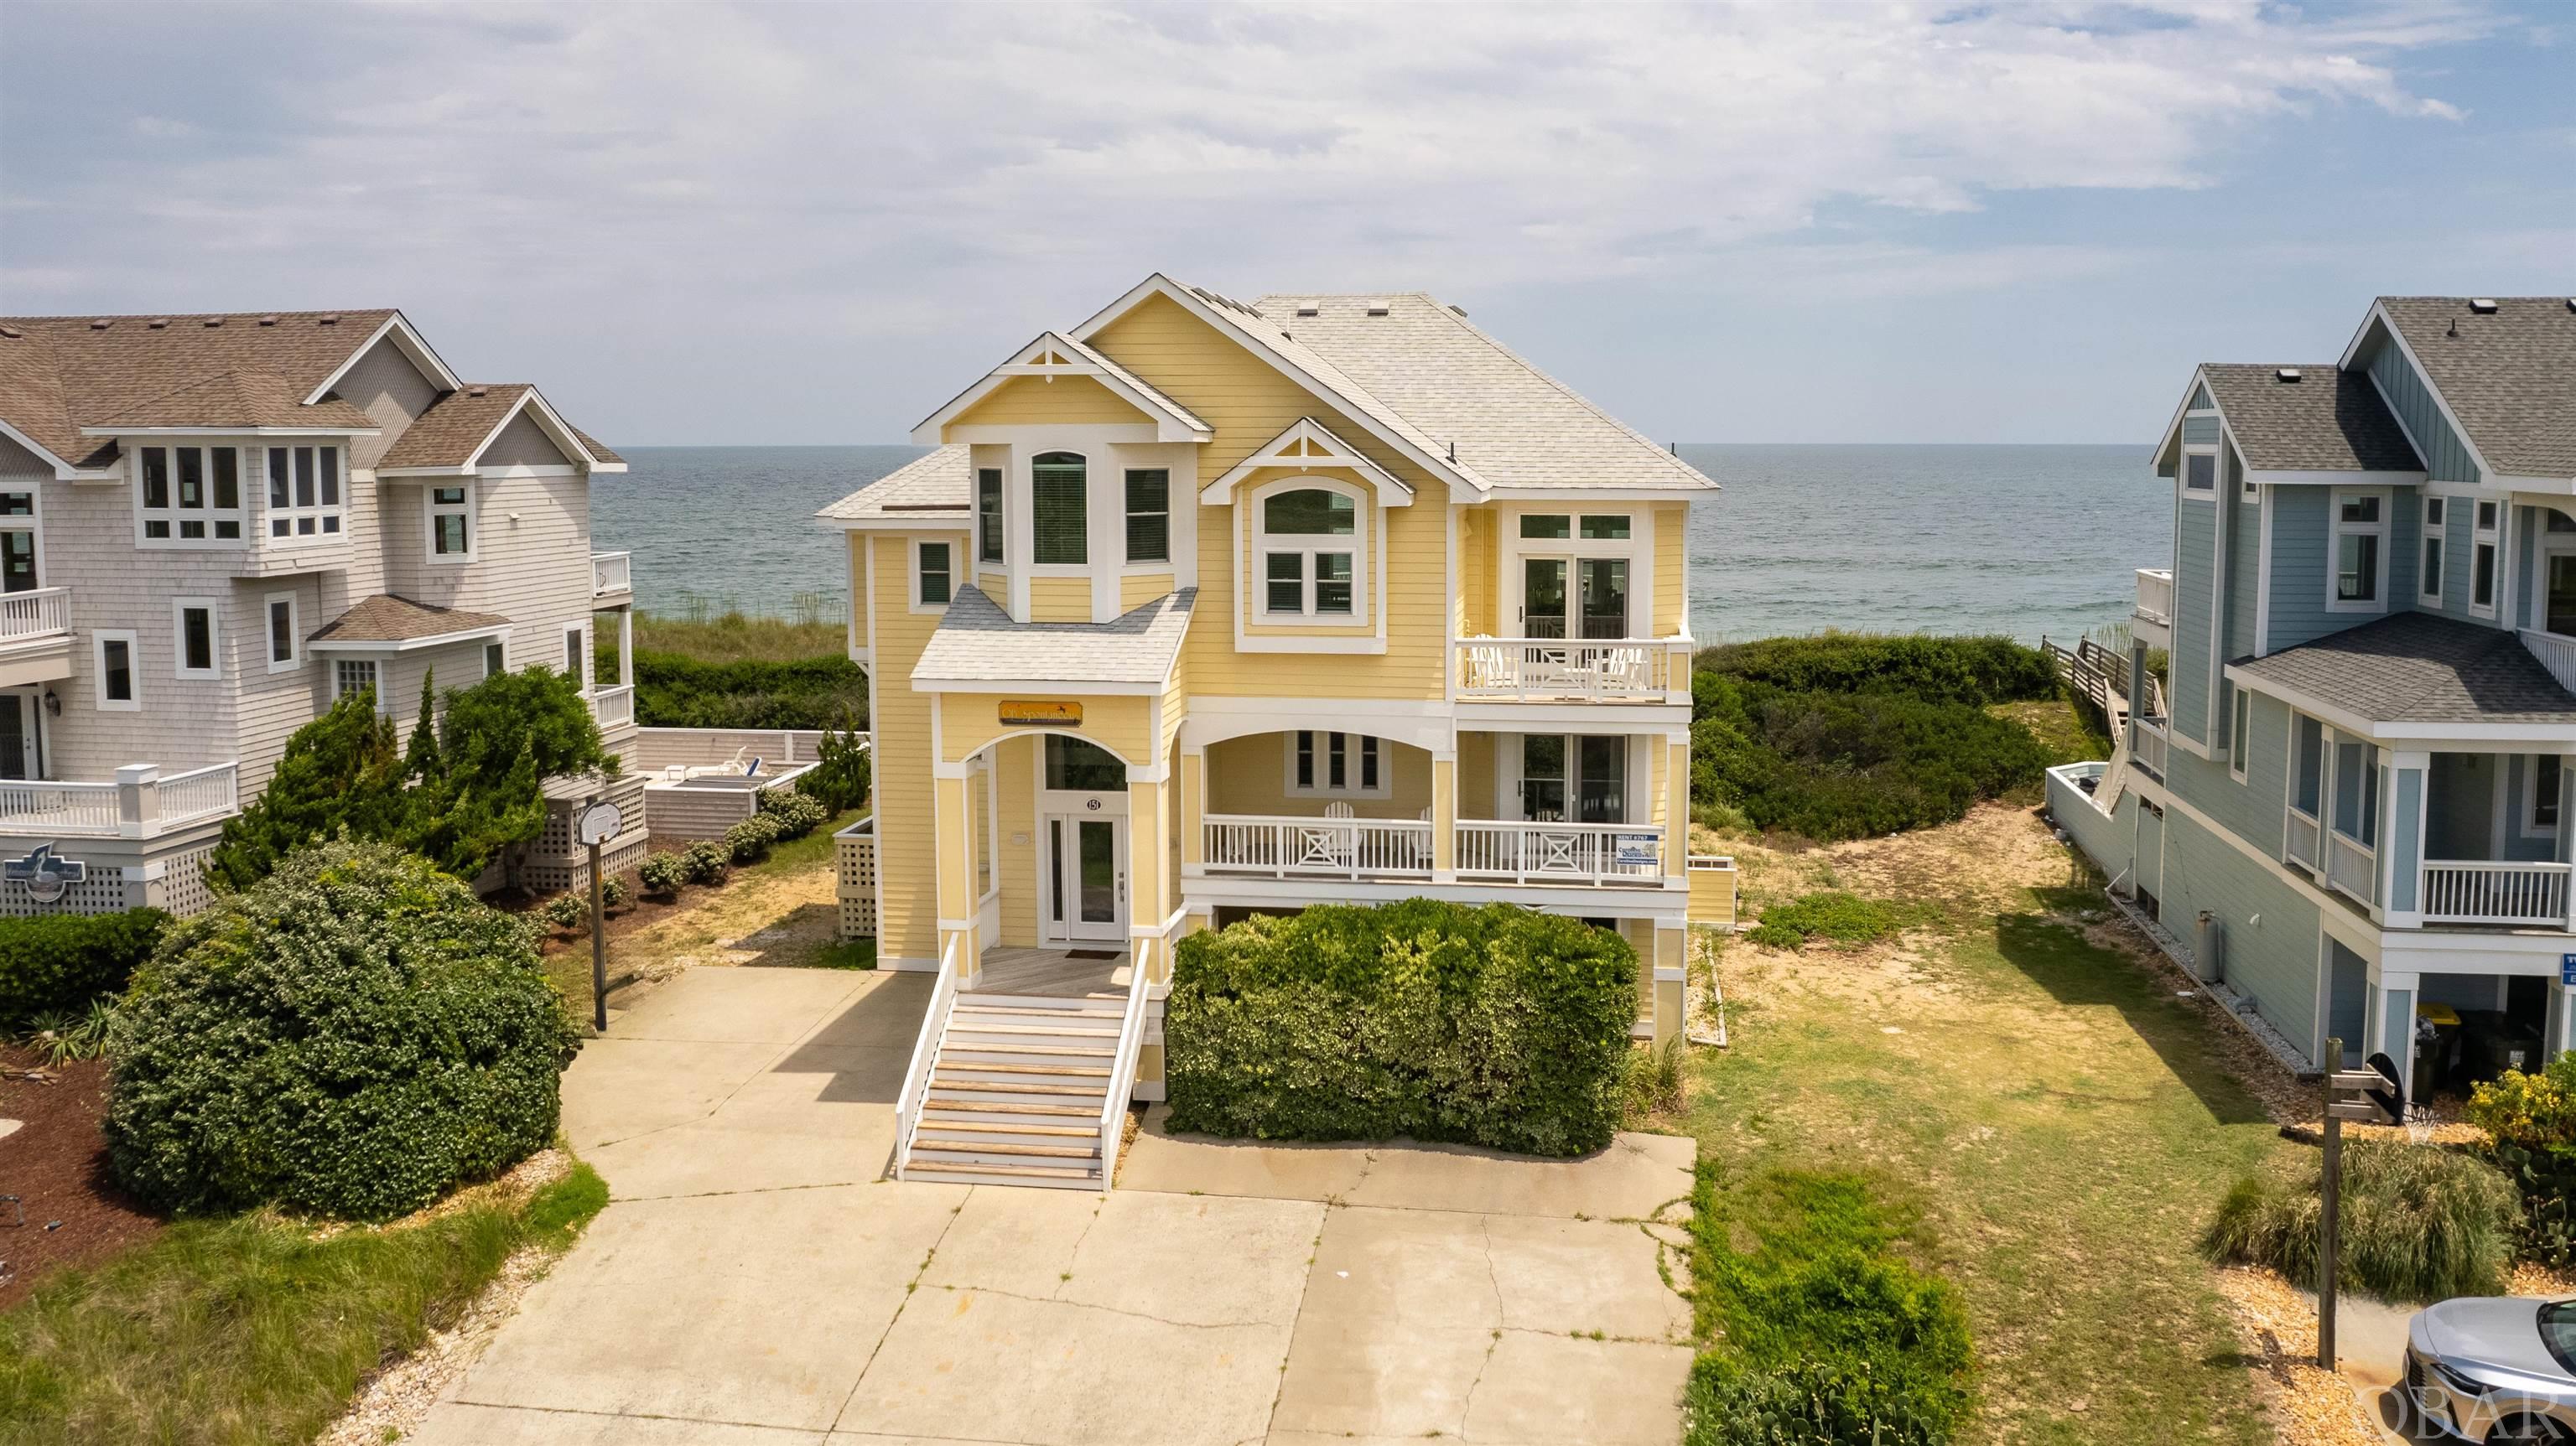 This Pine Island oceanfront home is truly stunning!  Completely remodeled and upgraded in last few years.  This home features breathtaking water views of ocean and sound from any spot on the top floor.  The open living makes this top floor space your absolute favorite place to be.  Each bedroom has a style of its own.  The ground floor game room will be the place to be for indoor fun.  Spacious decking, luxurious 30x15 private pool, walkway to the wide open beaches for the outdoor activities.  This home truly has it all!  Top floor en suite for one floor living when it's just you.  Uniquely located with very few homes around so the beaches are sparsely populated.  Overlooks the sound for sunsets and wildlife viewing.  The home is well cared for and guests love it.  Quick access to Duck or Corolla as it's centrally located right between the two.  OB Spontaneous is a place you can truly let your cares go and enjoy the absolute best the Outer Banks has to offer!